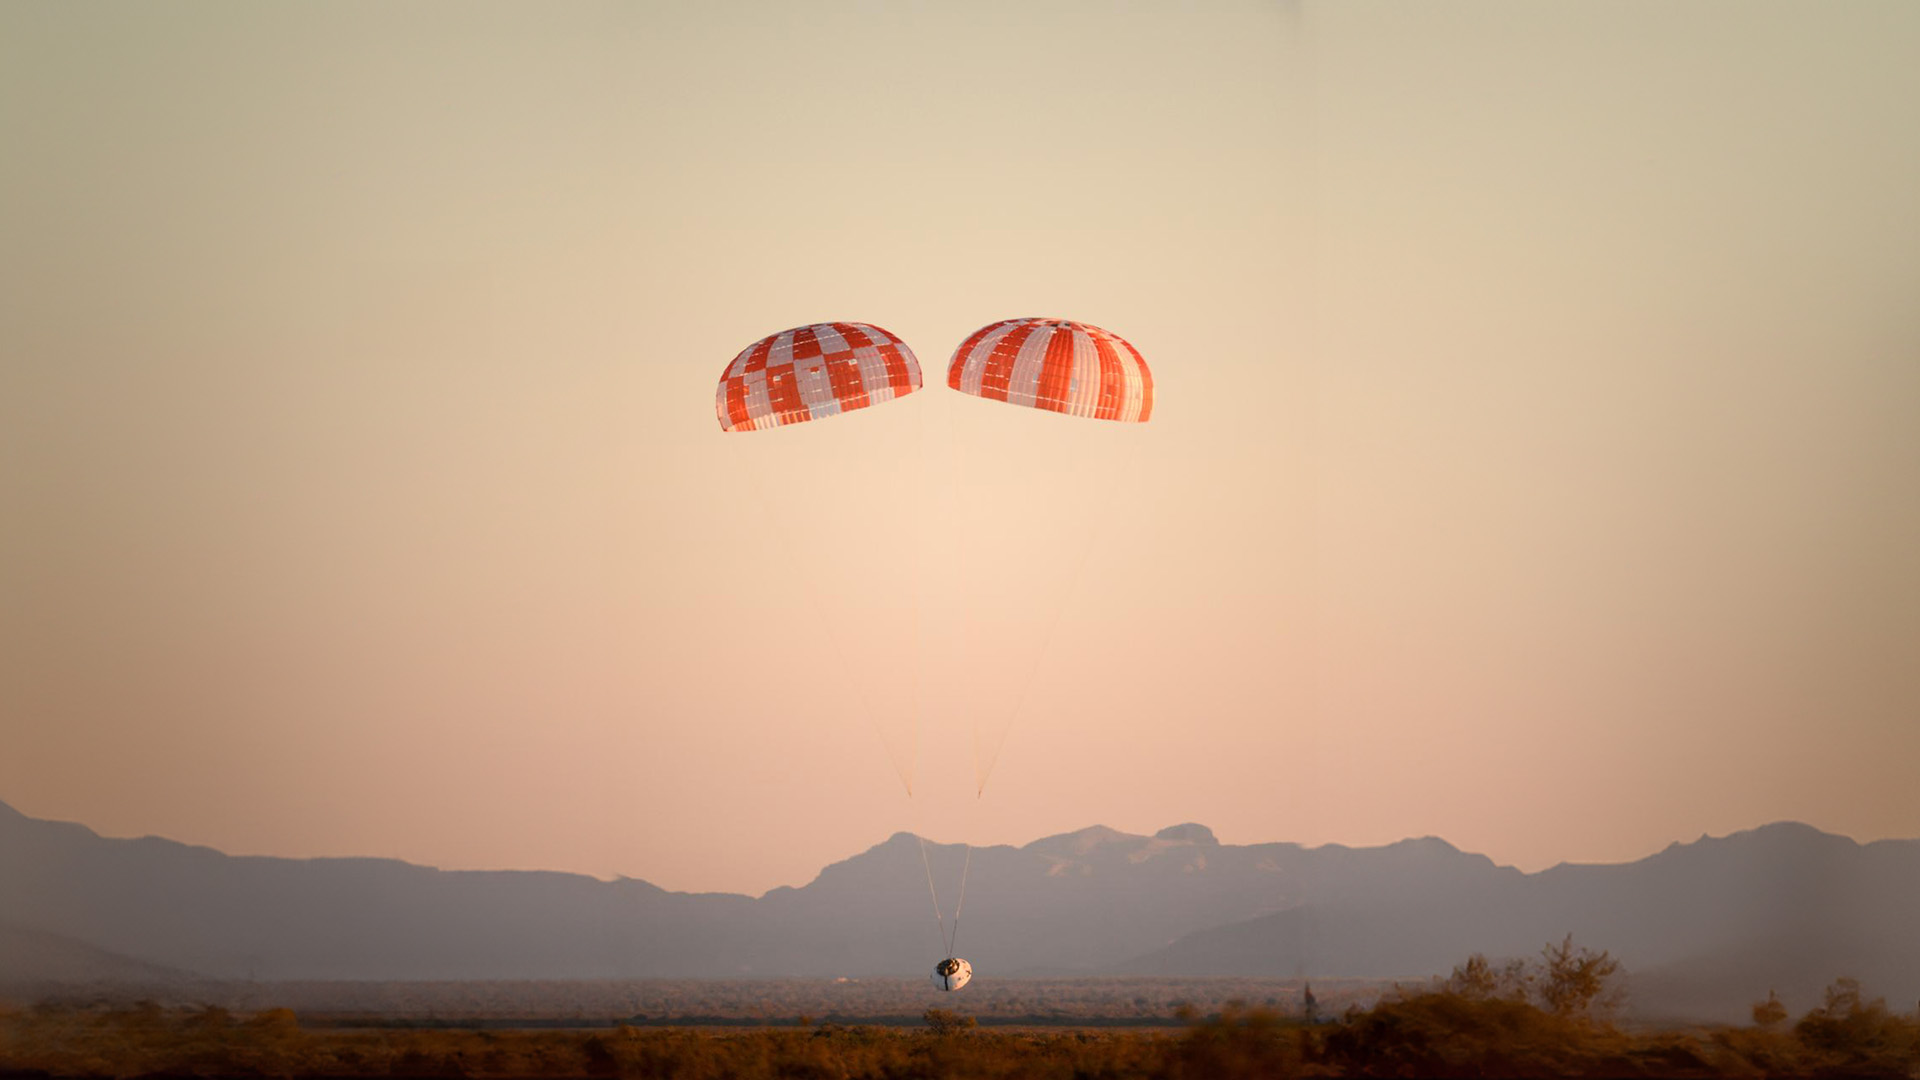 Image of Orion spacecraft re-entry